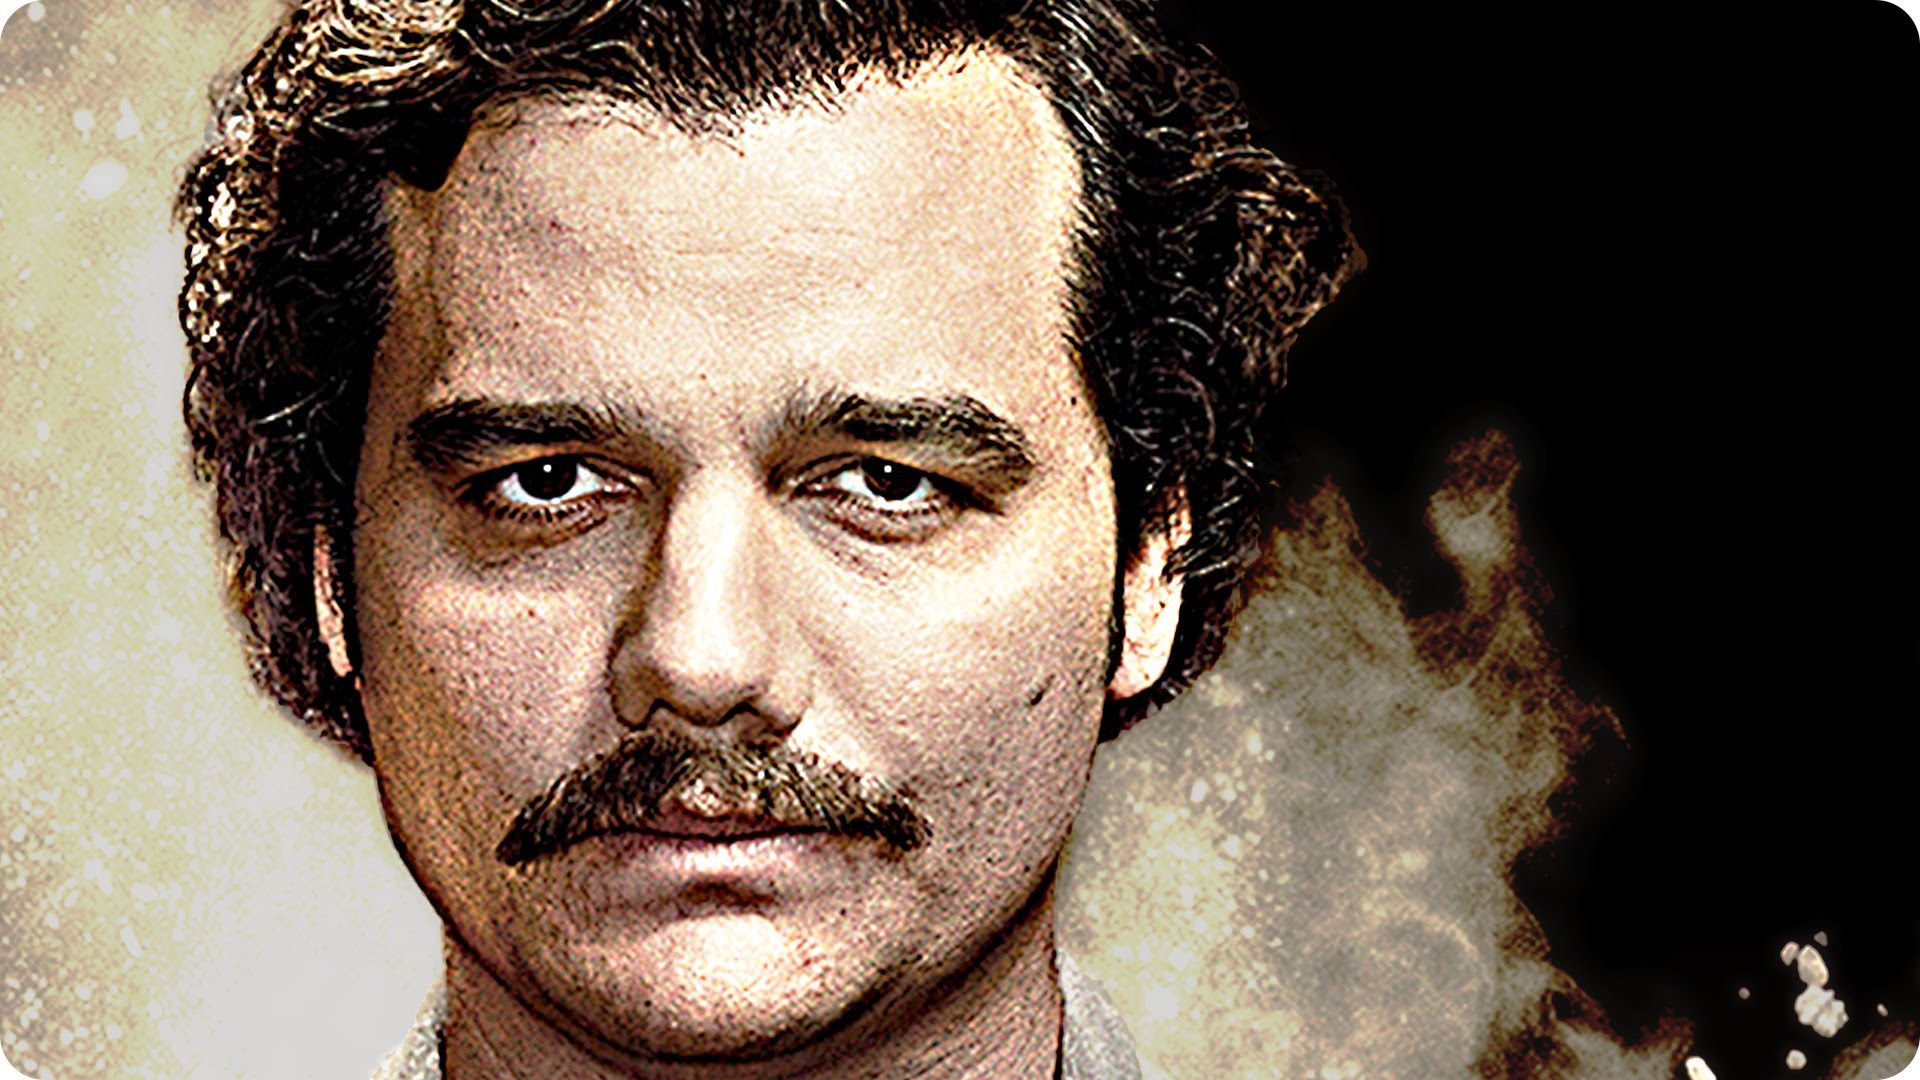 High Definition Wallpaper Of Wagner Moura As Pablo , HD Wallpaper & Backgrounds